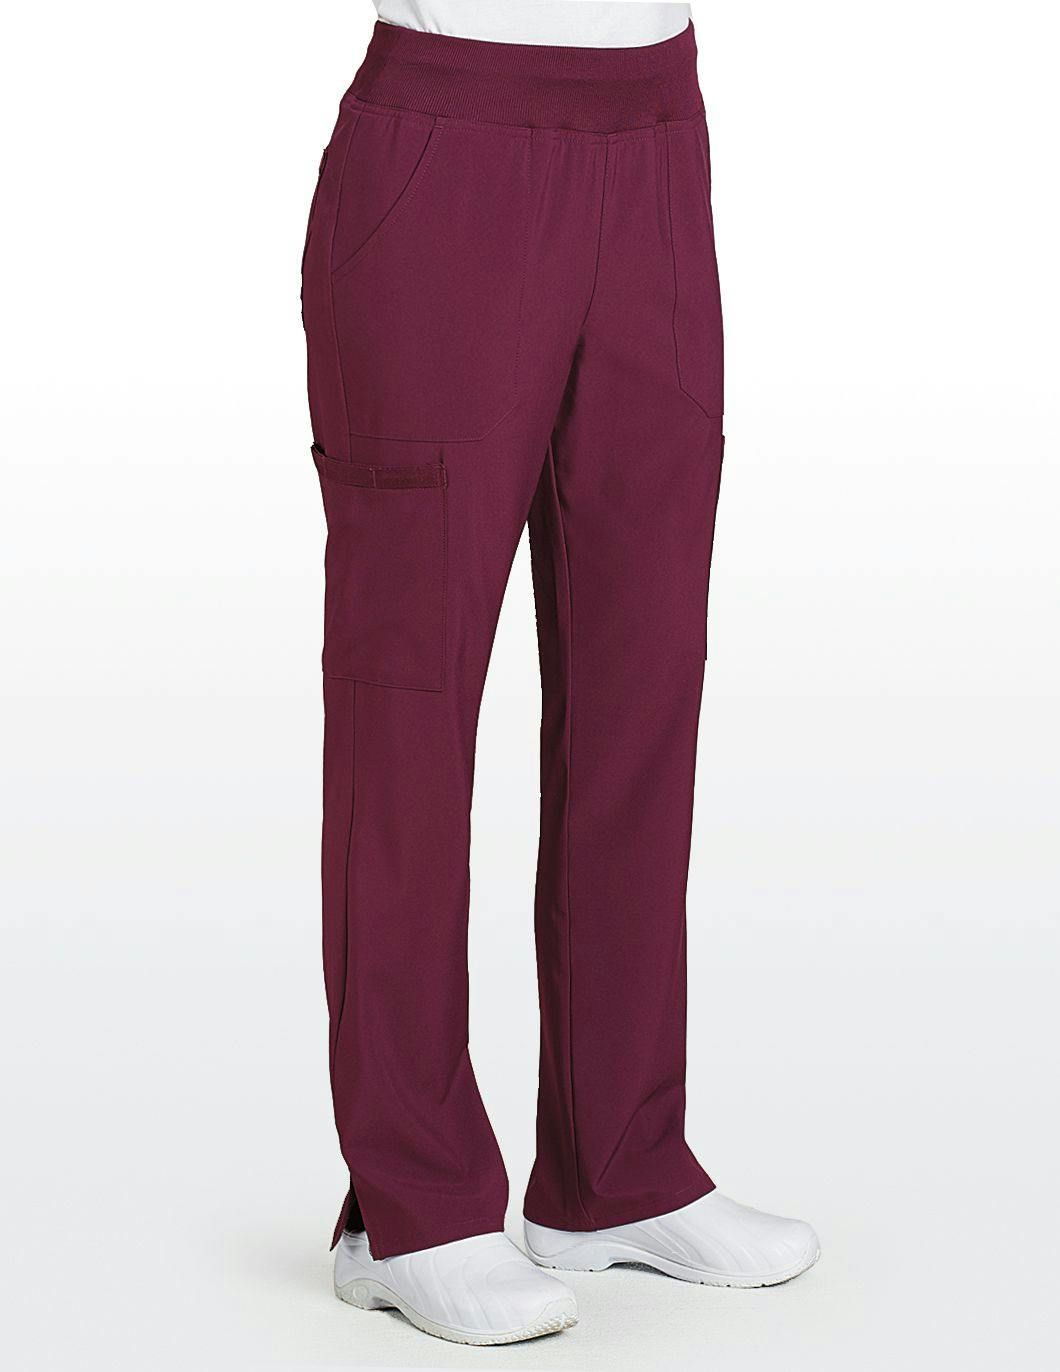 dickies-eds-essentials-womens-pull-on-cargo-scrub-pant-wine